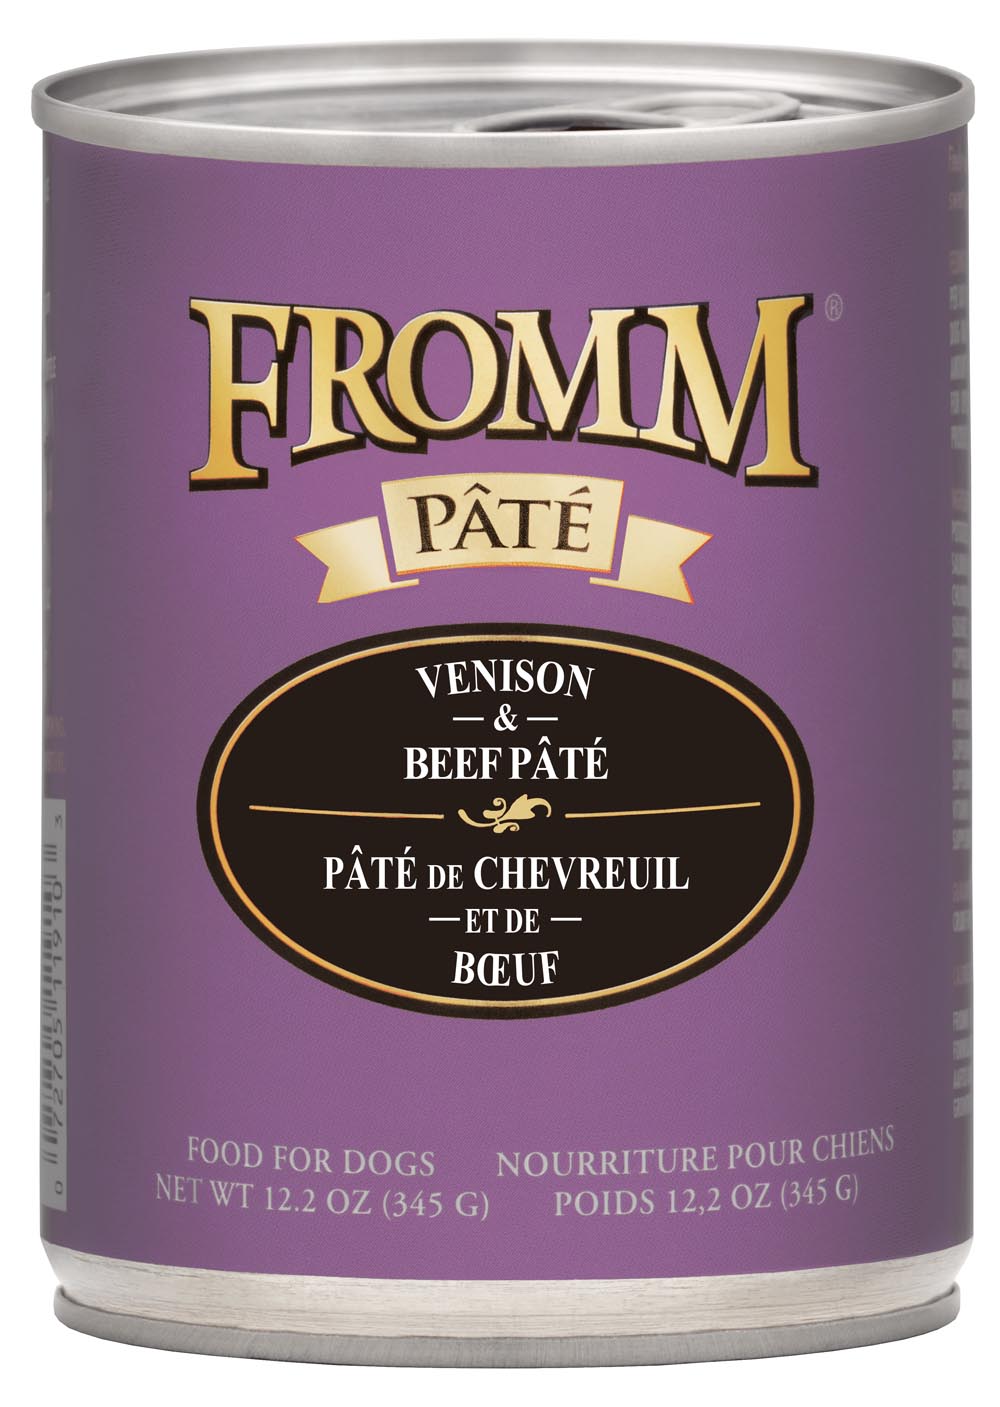 Fromm Venison & Beef Pate Food for Dogs, 12.2 OZ